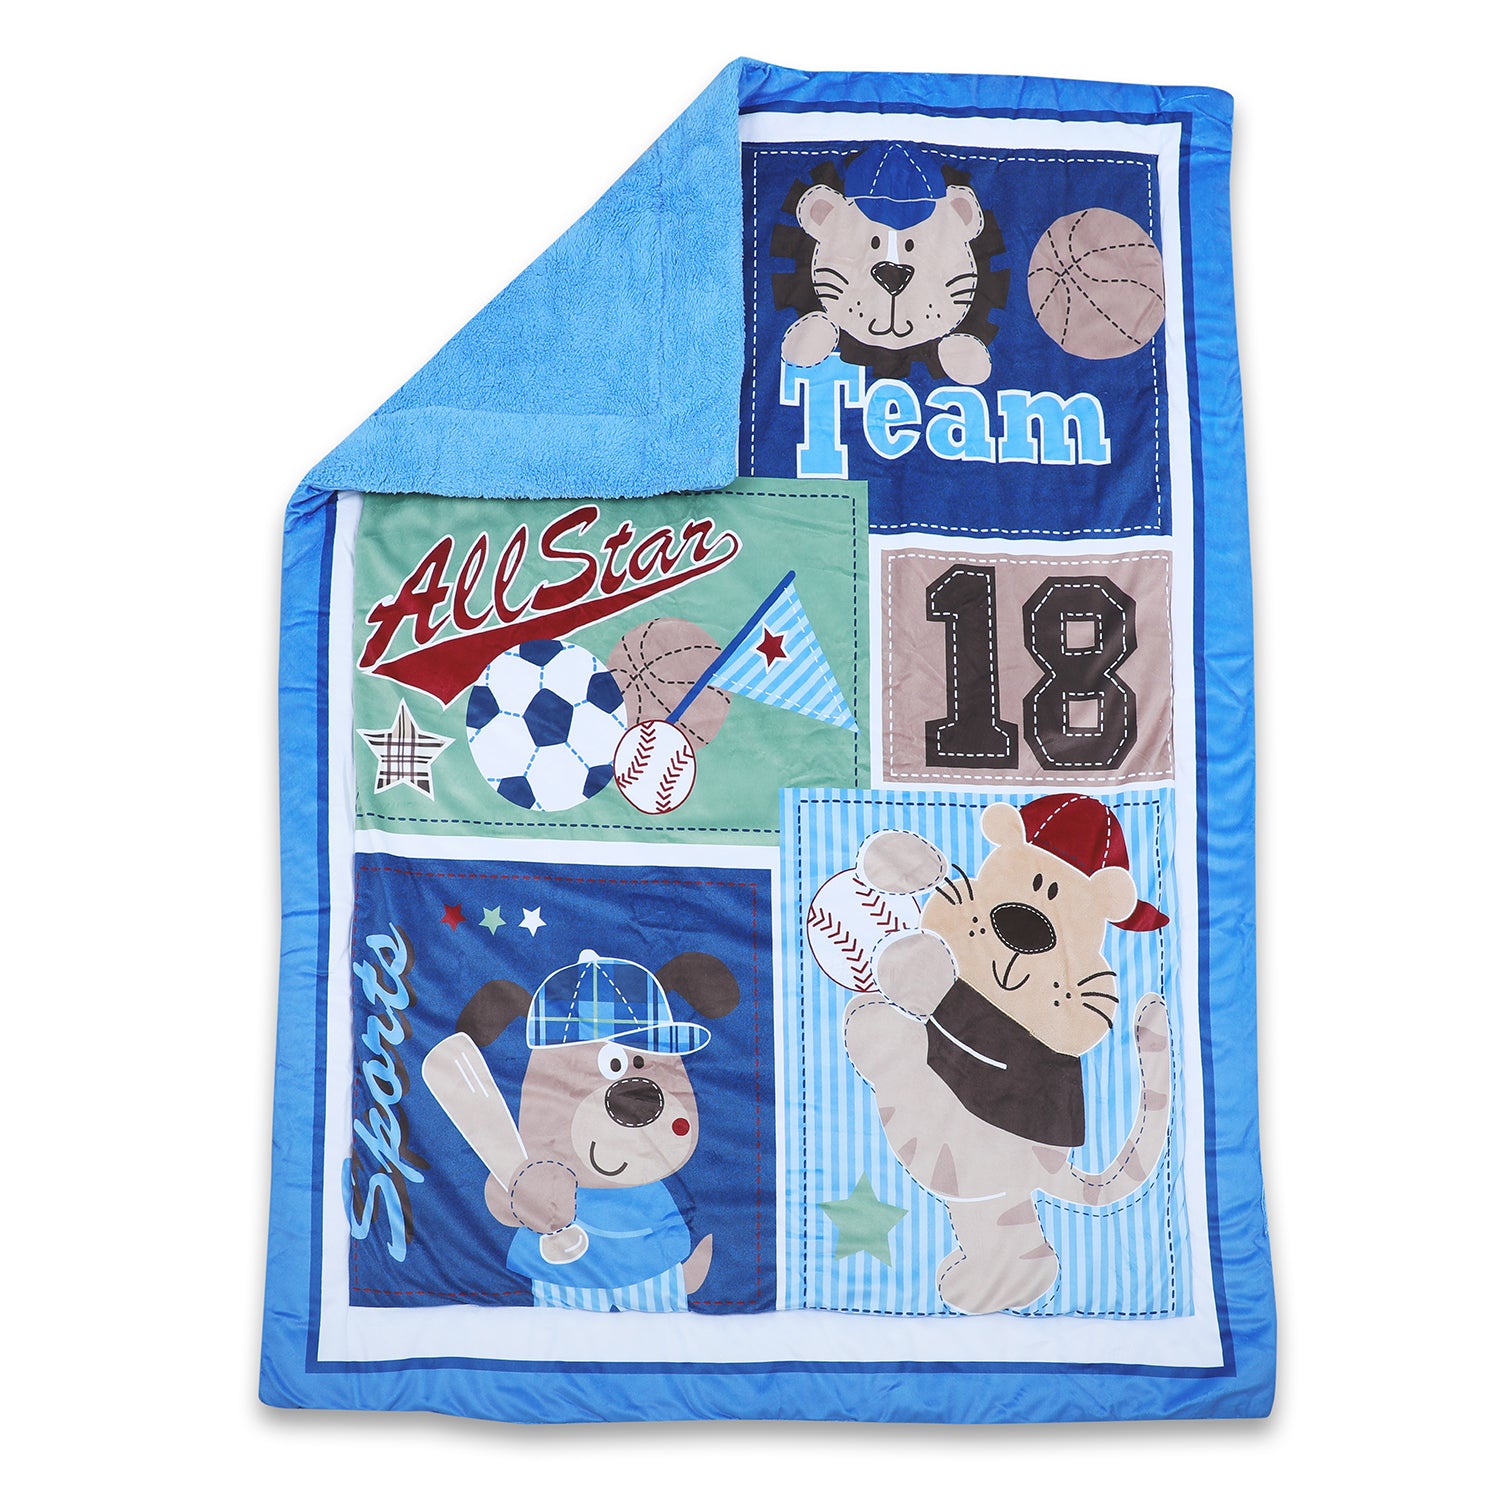 Baby Moo Sporty Champions Soft Fur Blanket - Blue - Baby Moo